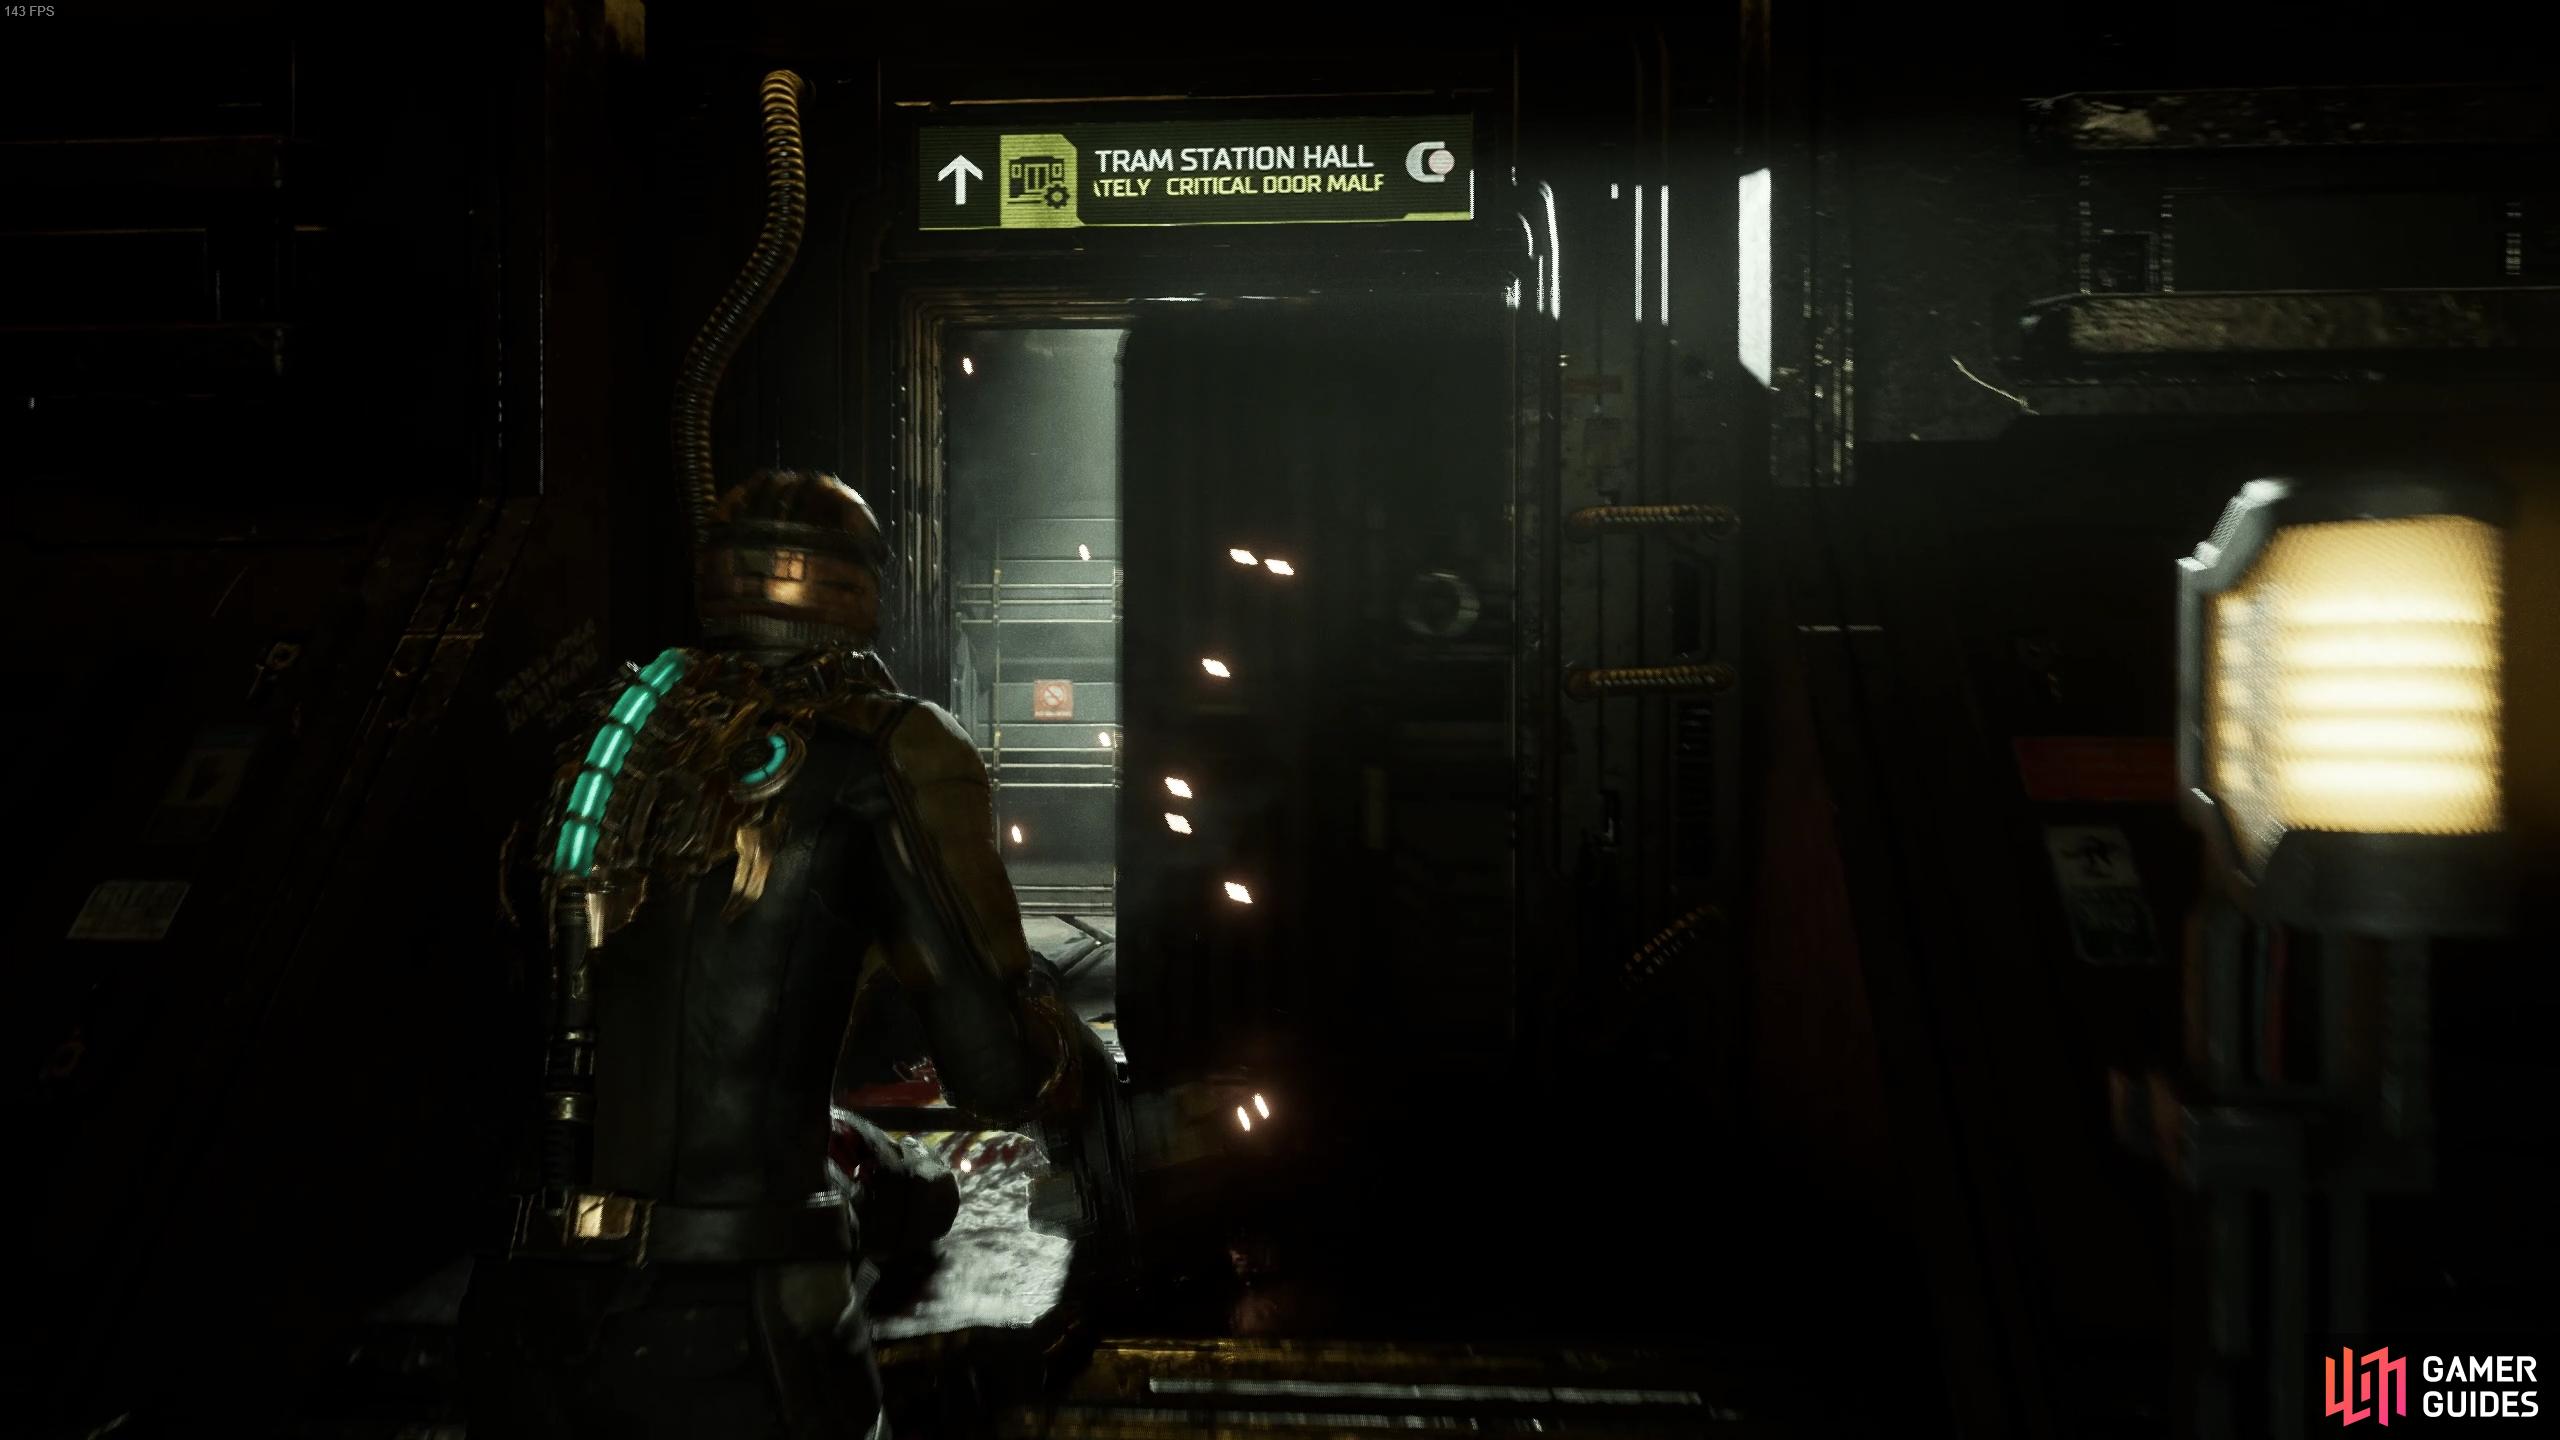 The Stasis Door log will trigger once you've acquired the Stasis Module to slow down the malfunctioning door.